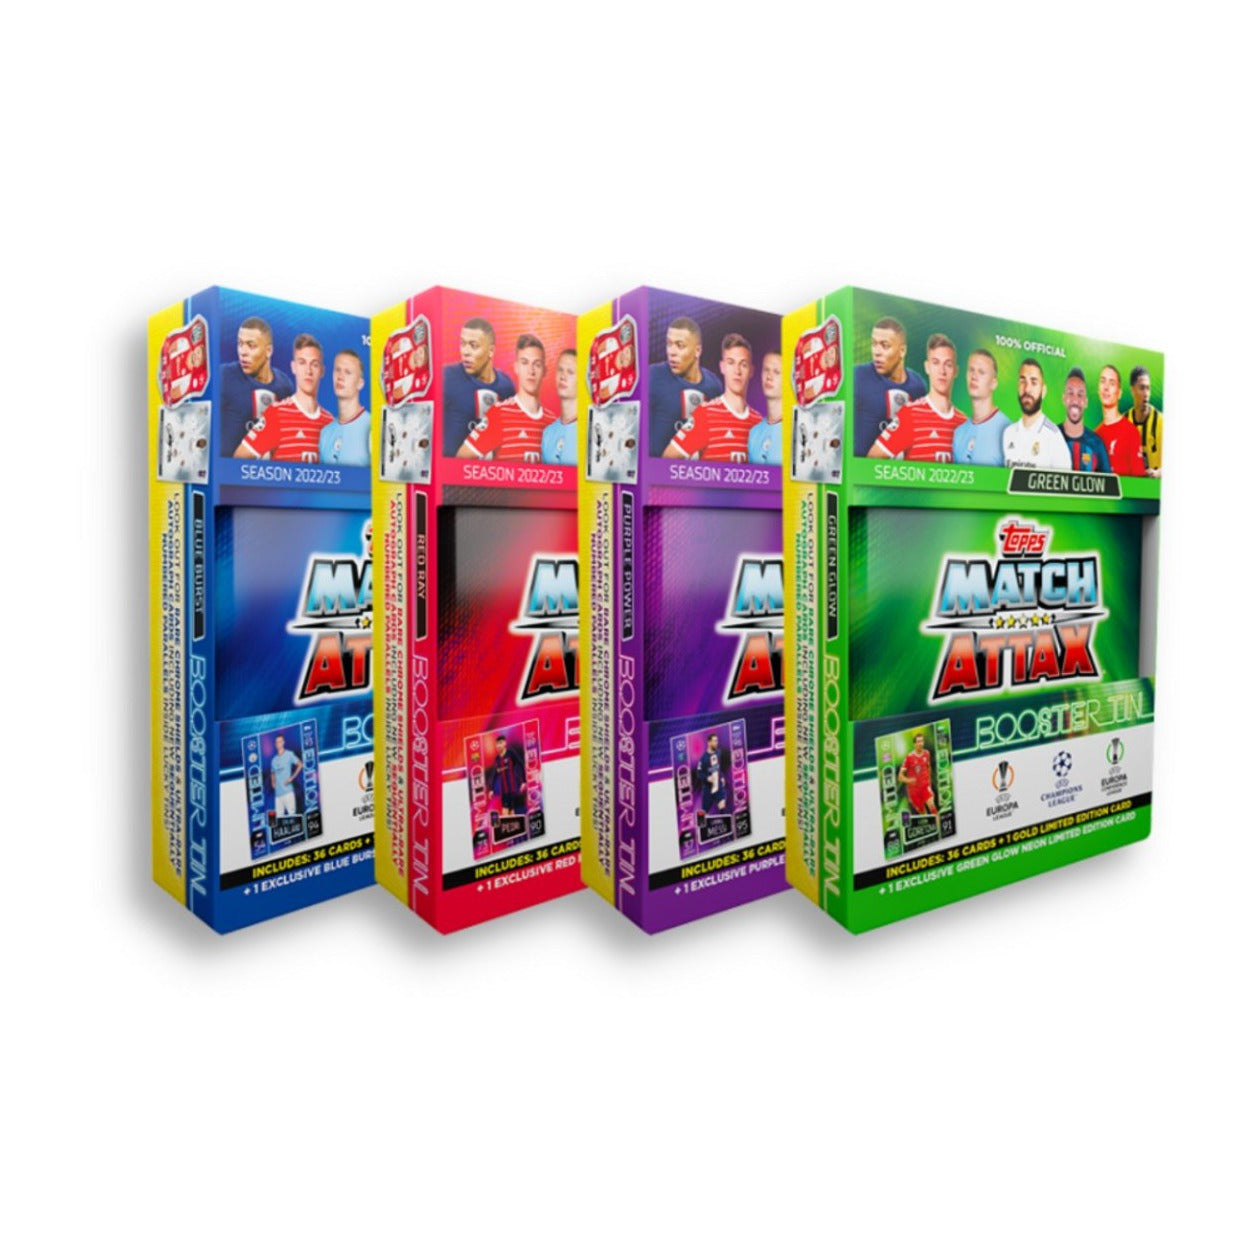 TOPPS UEFA CHAMPIONS LEAGUE MATCH ATTAX 22/23 MINI TIN SOCCER TRADING CARDS - RECEIVE 1 STYLE AT RANDOM!